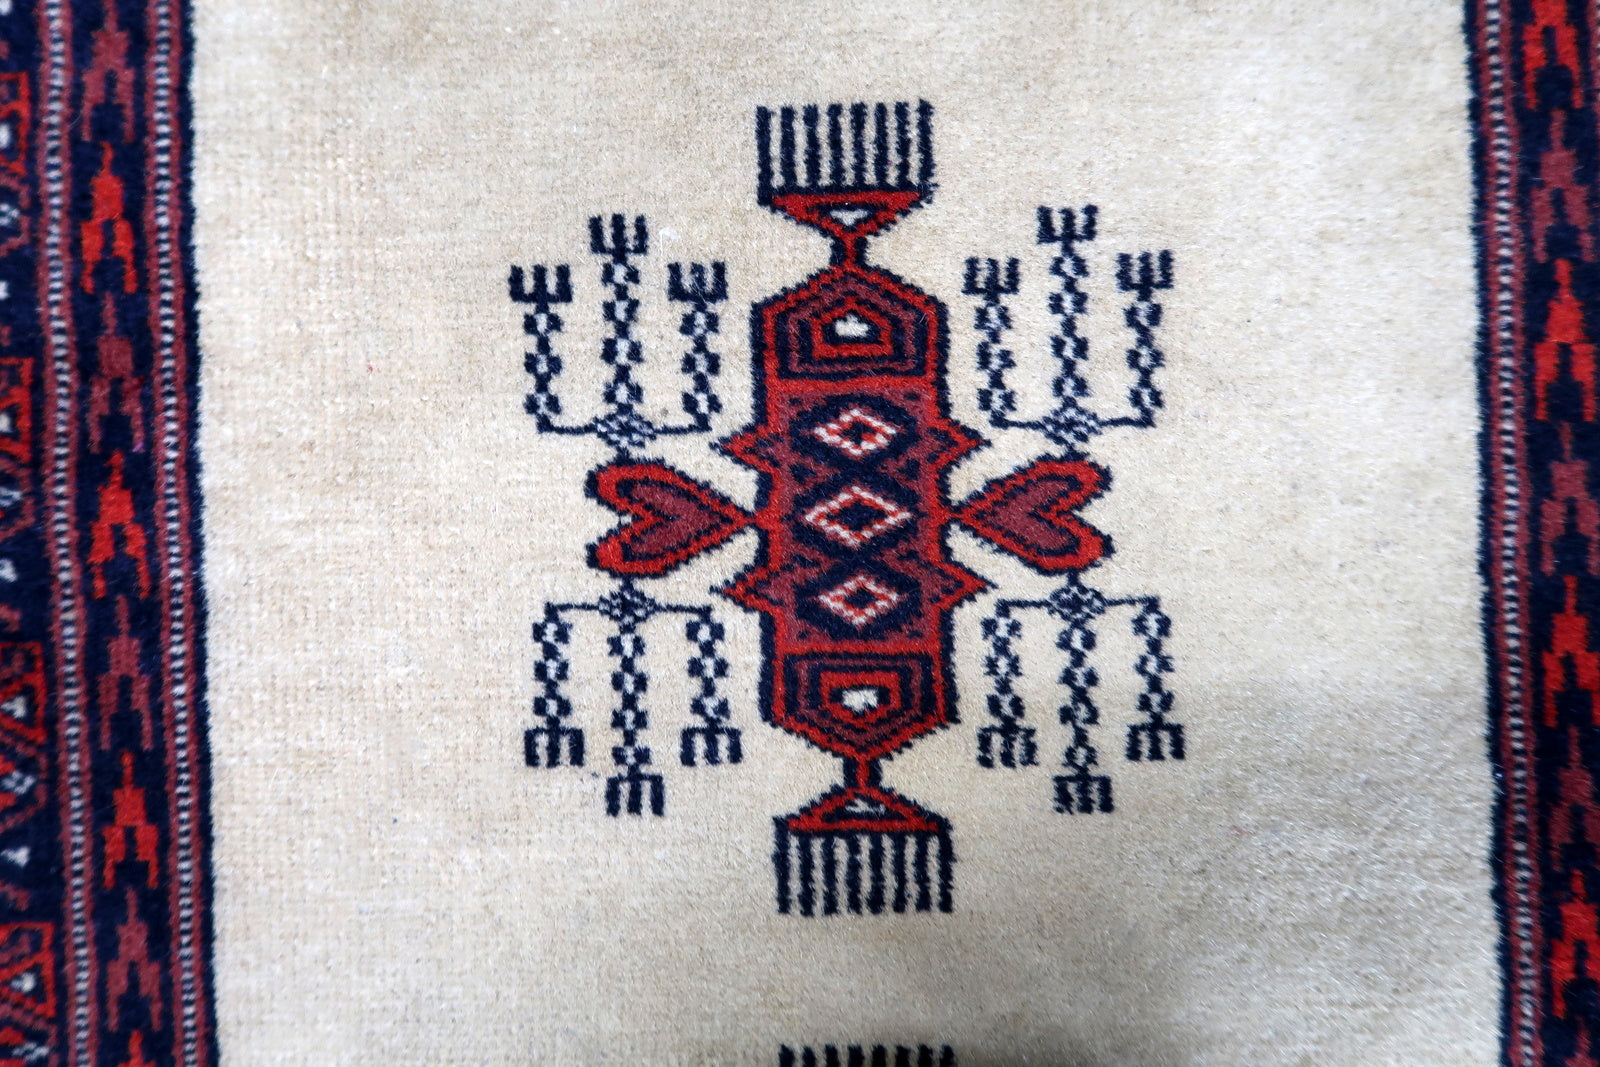 Handmade vintage Uzbek Bukhara runner in traditional design. The rug is from the end of 20th century made in wool.